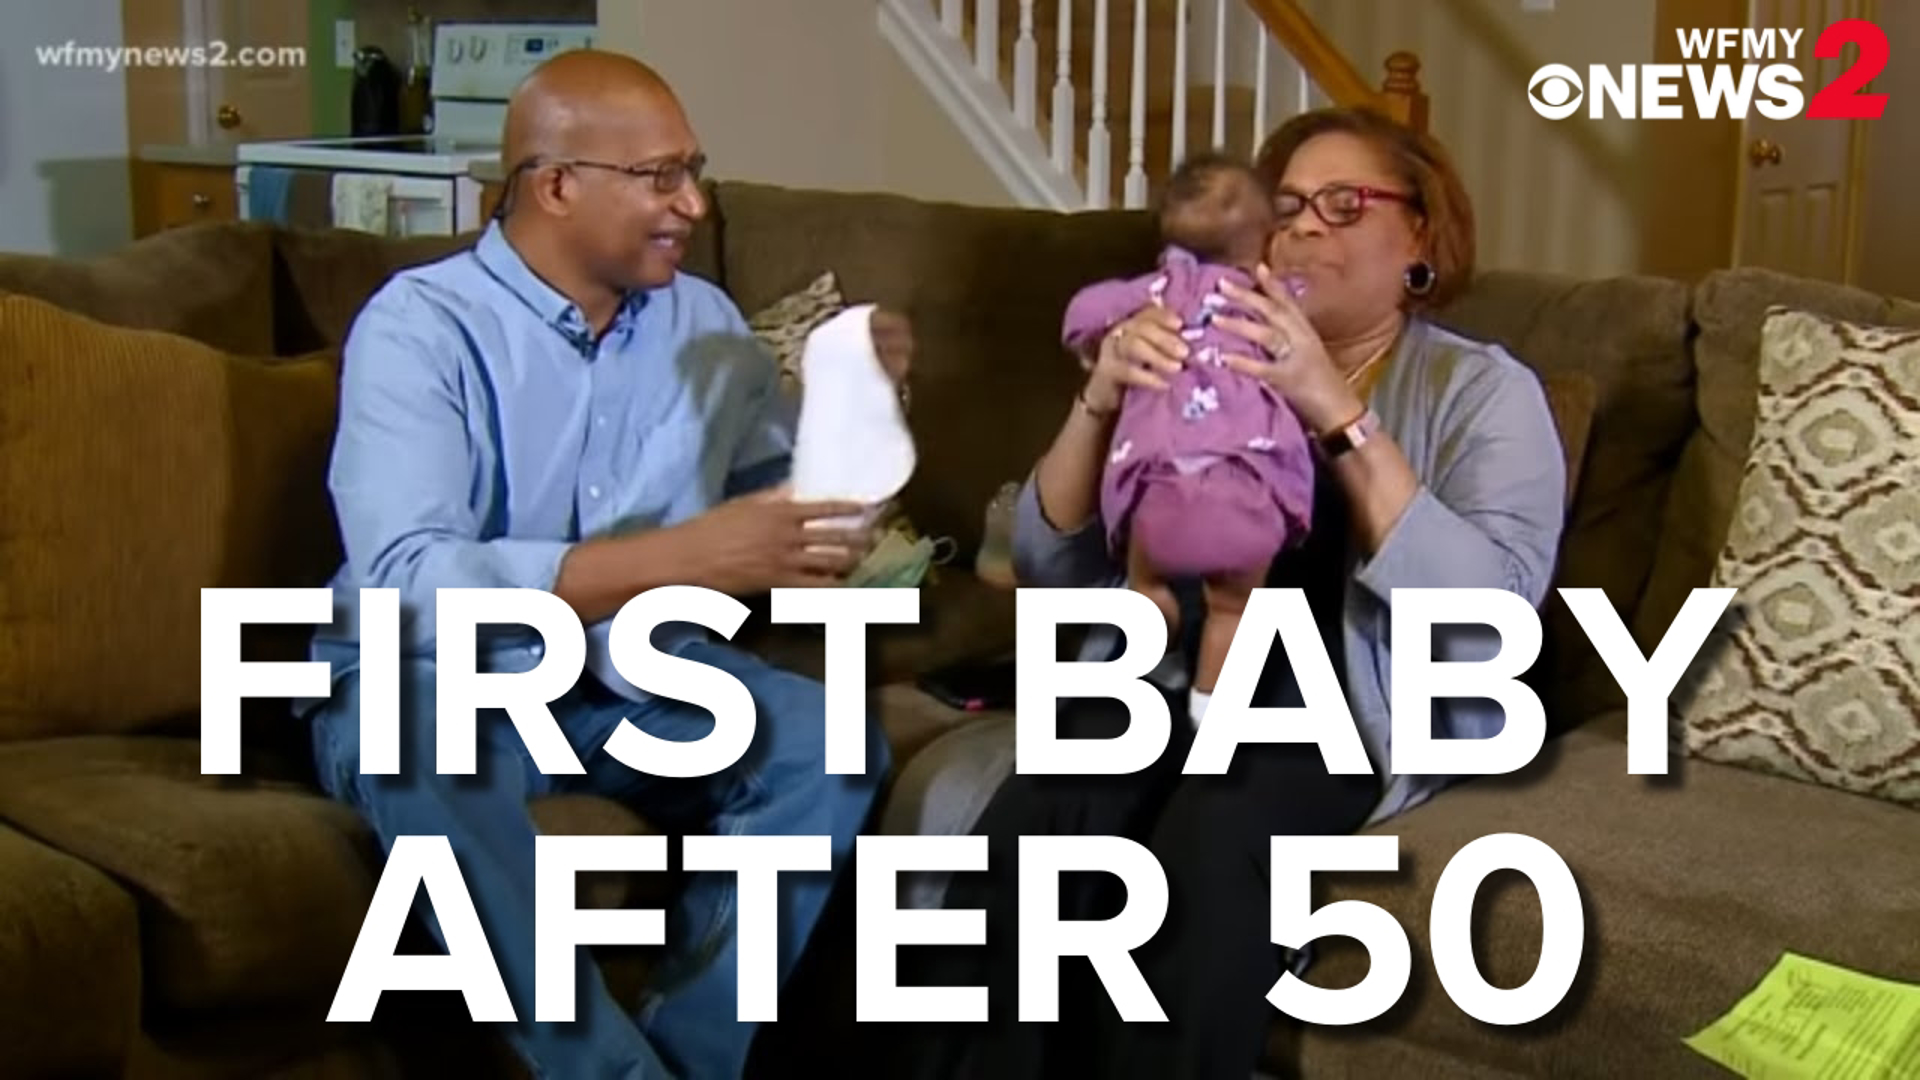 A North Carolina couple had their baby later in life, and now their decades-long fertility story is inspiring others.